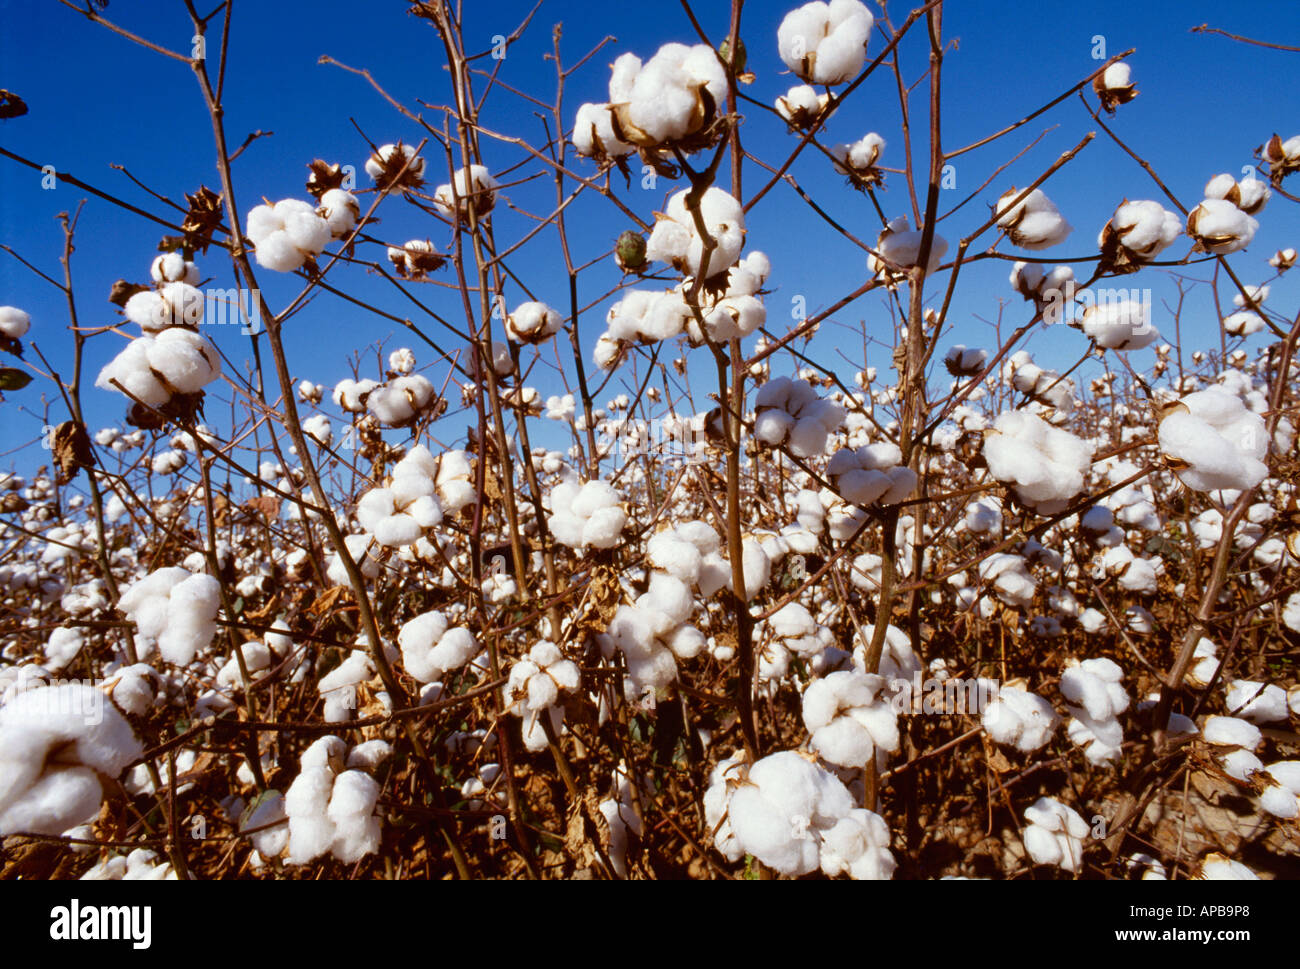 Closeup view of harvest stage NuCOTN 33B Bt Roundup Ready genetically modified (gm) cotton plants / Mississippi, USA. Stock Photo